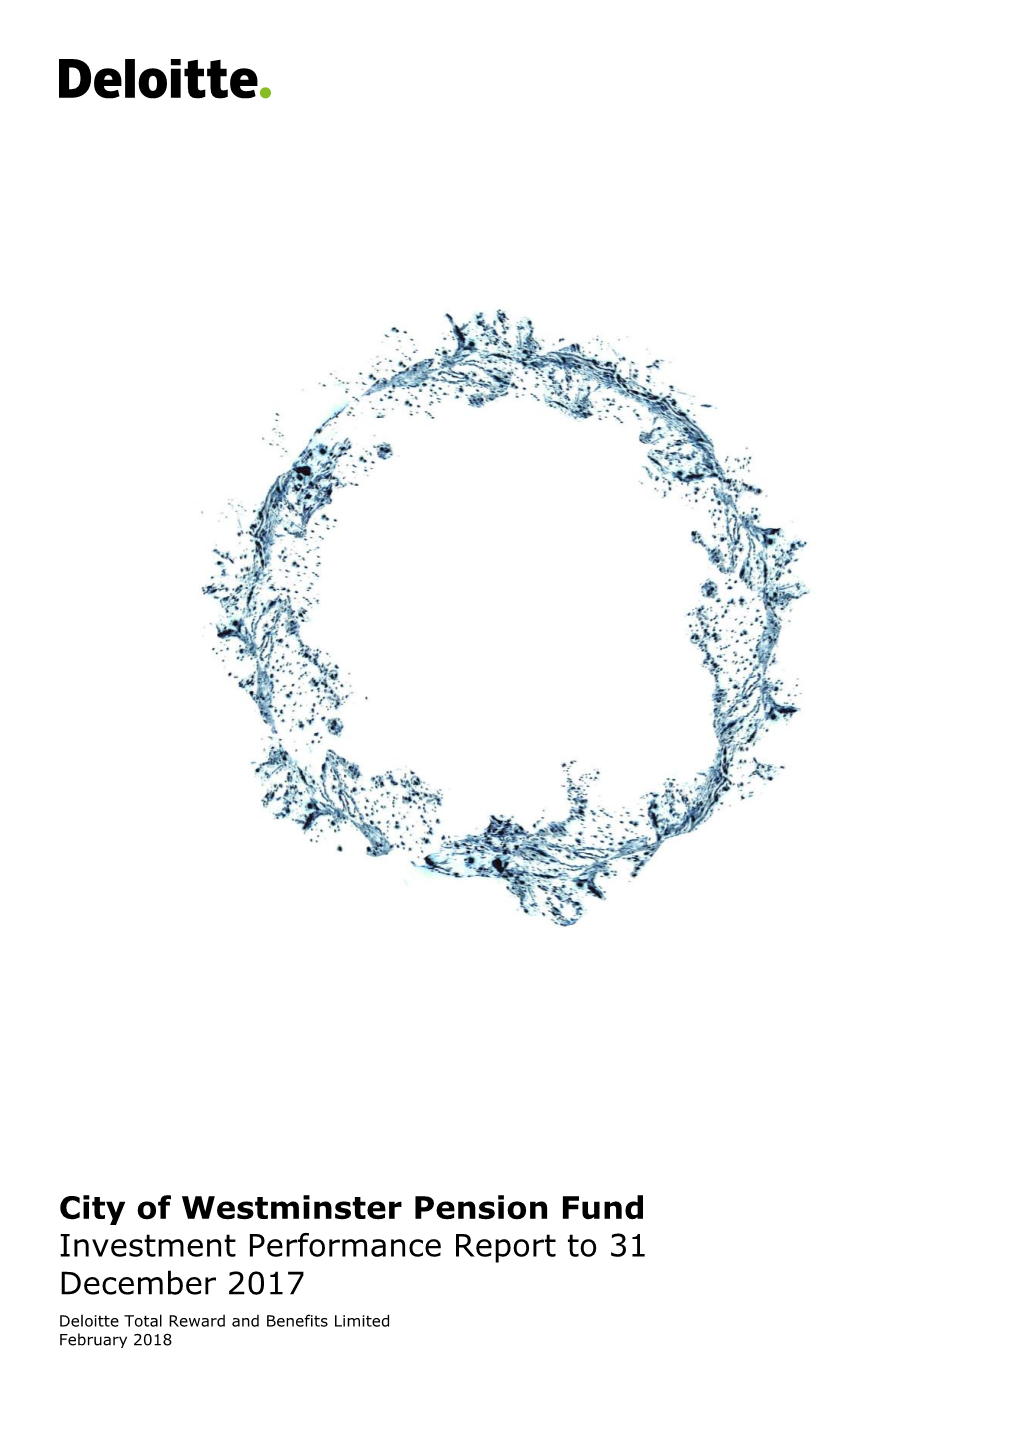 City of Westminster Pension Fund Investment Performance Report to 31 December 2017 Deloitte Total Reward and Benefits Limited February 2018